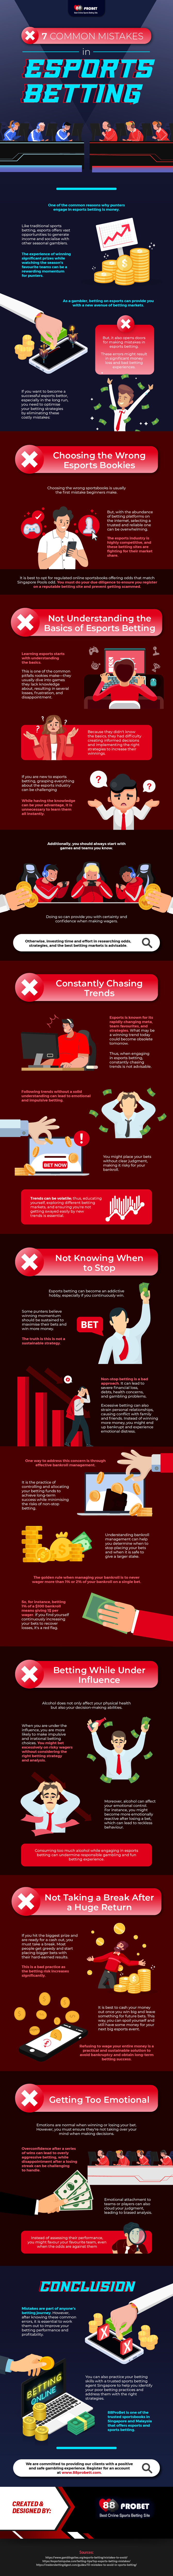 7-Common-Mistakes-in-Esports-Betting-asdaw213